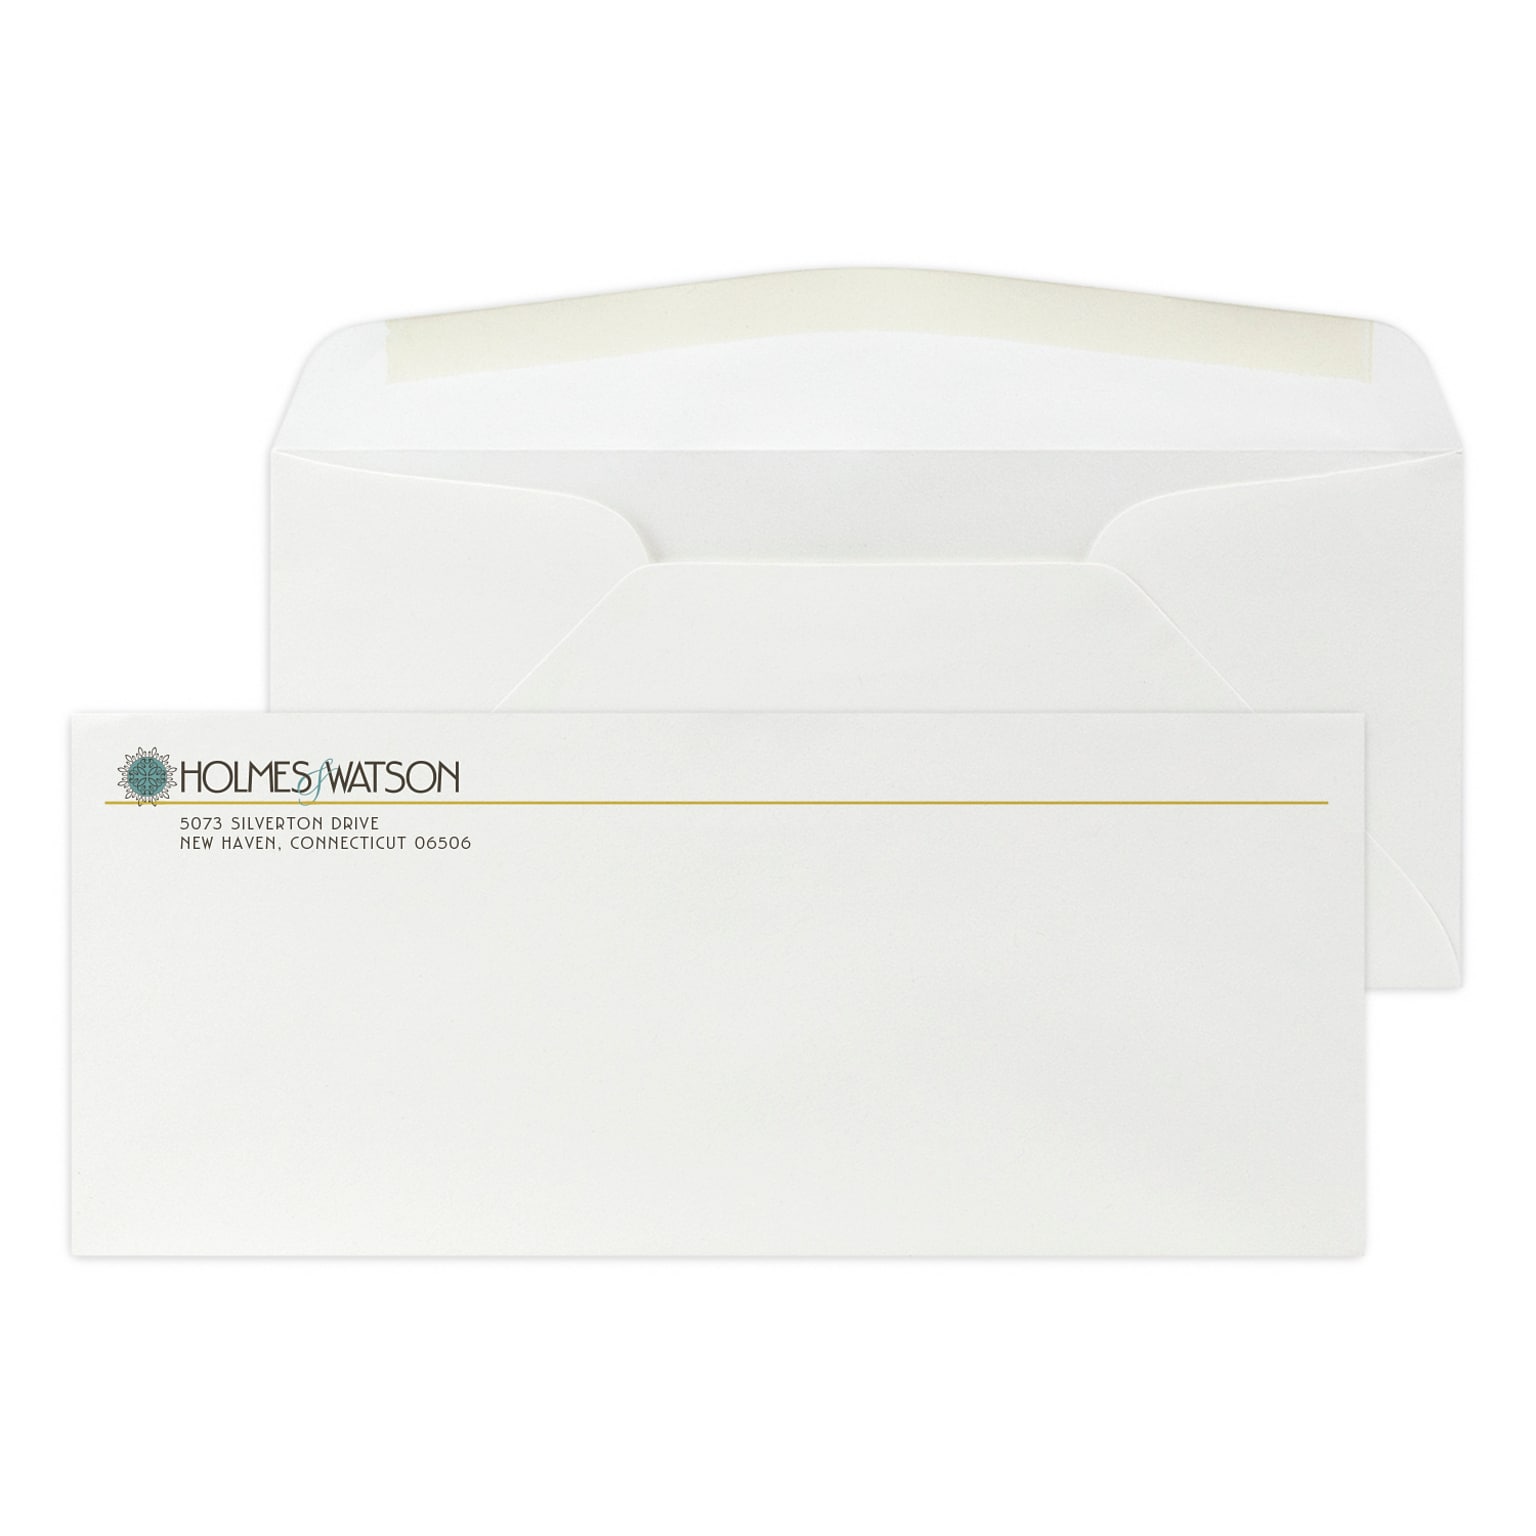 Custom Full Color #10 Stationery Envelopes, 4 1/4 x 9 1/2, 24# ENVIRONMENT® White Recycled, Flat Ink, 250 / Pack